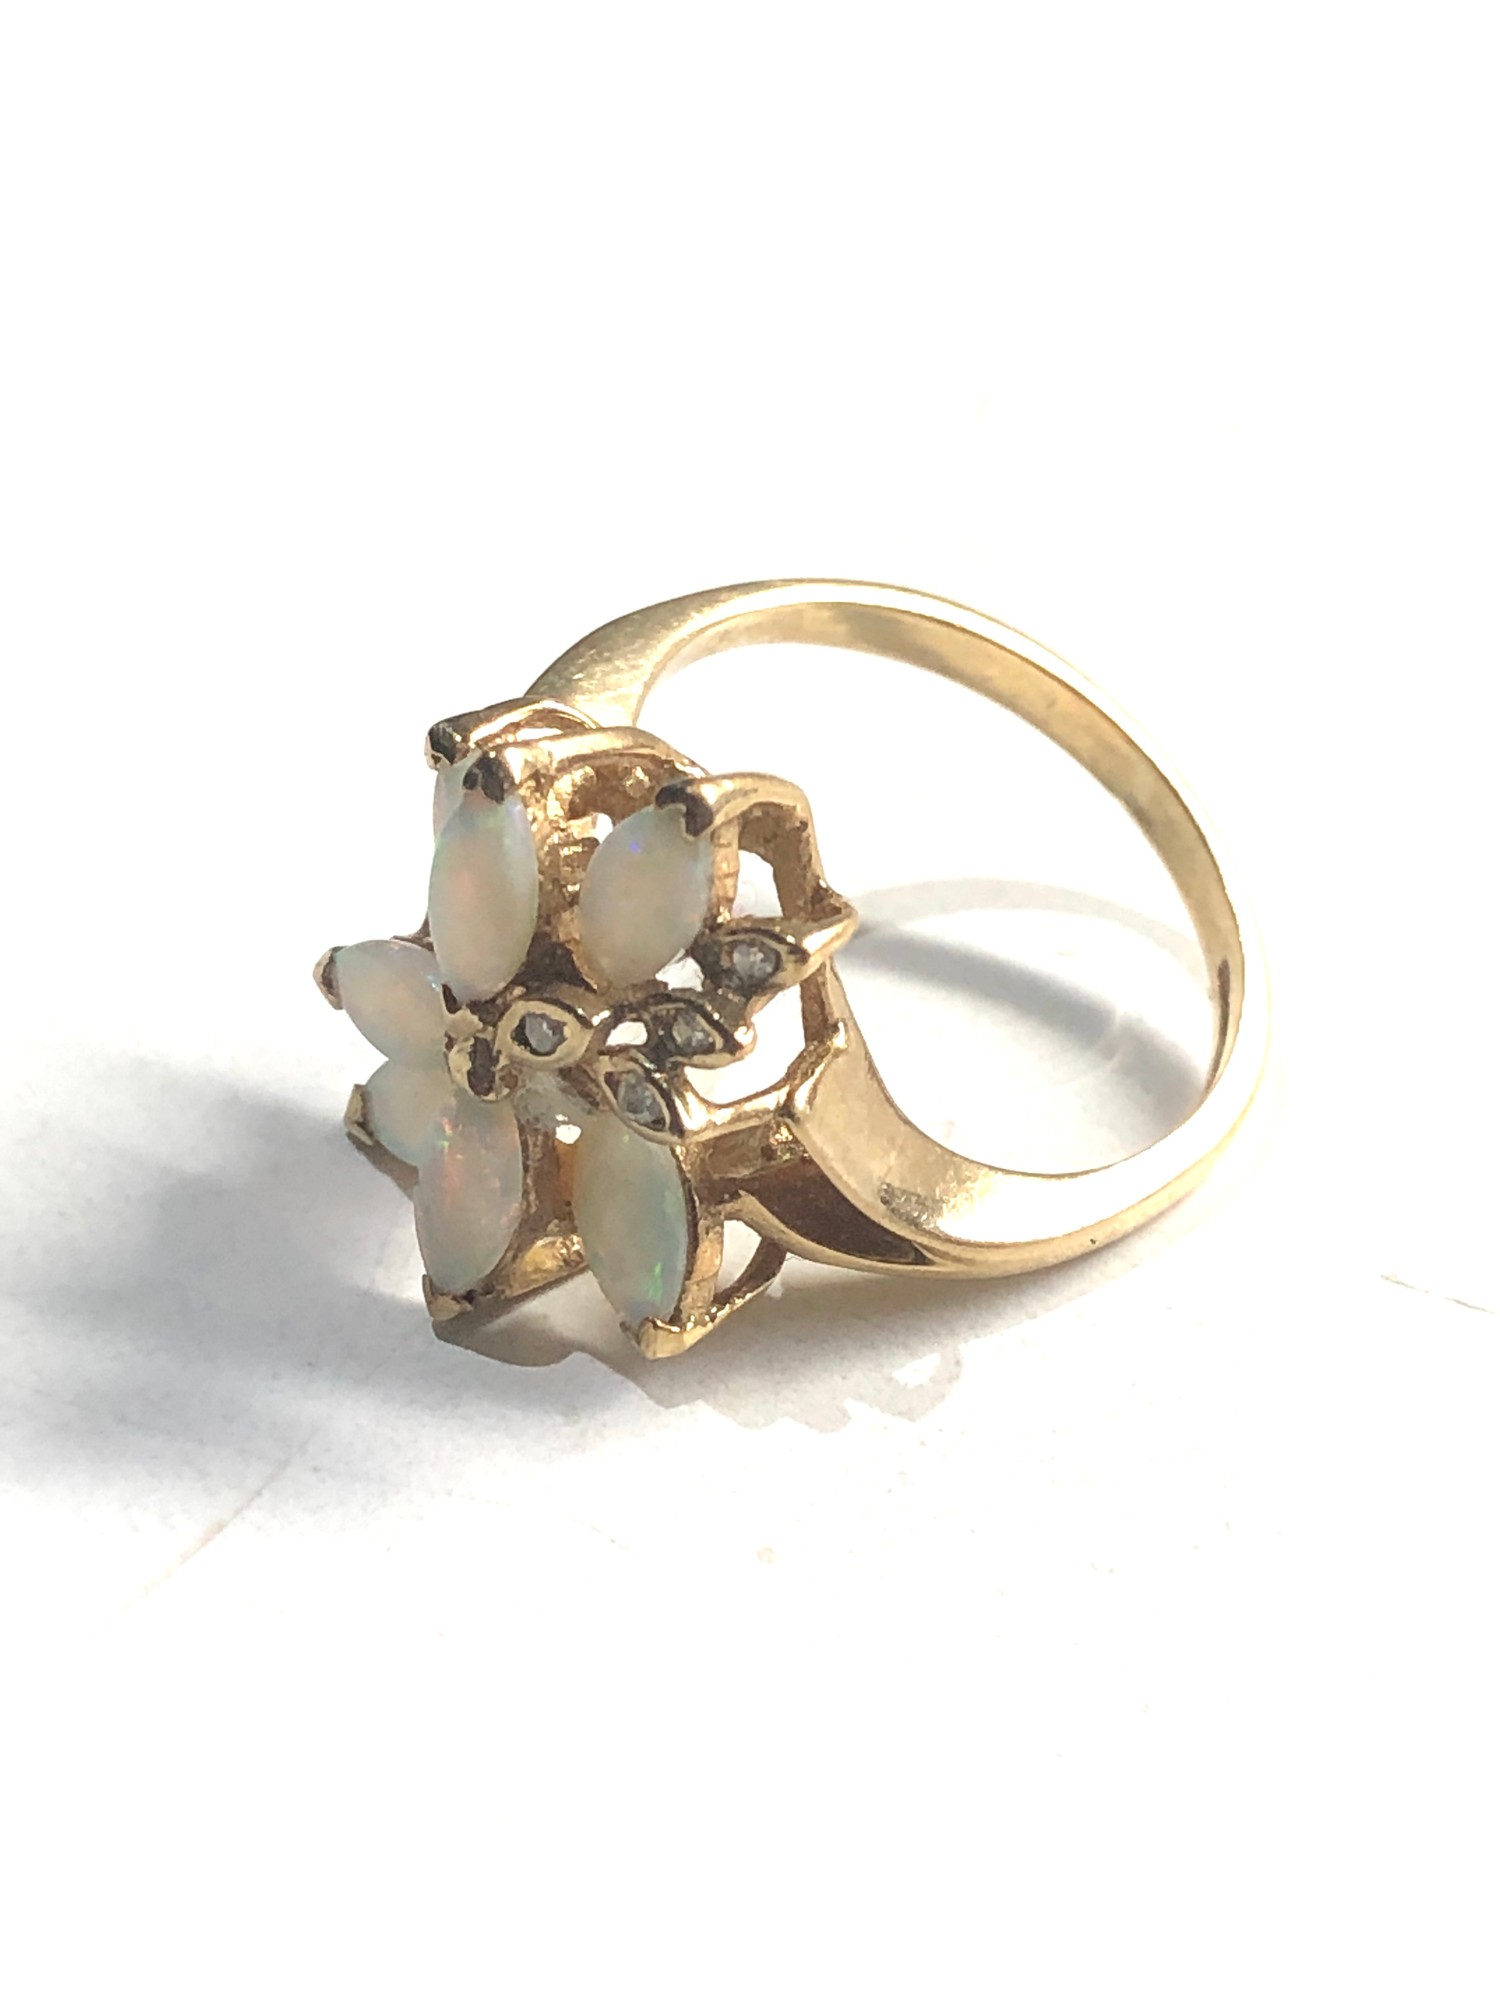 9ct Gold opal & diamond cluster ring 3.4g - Image 2 of 3